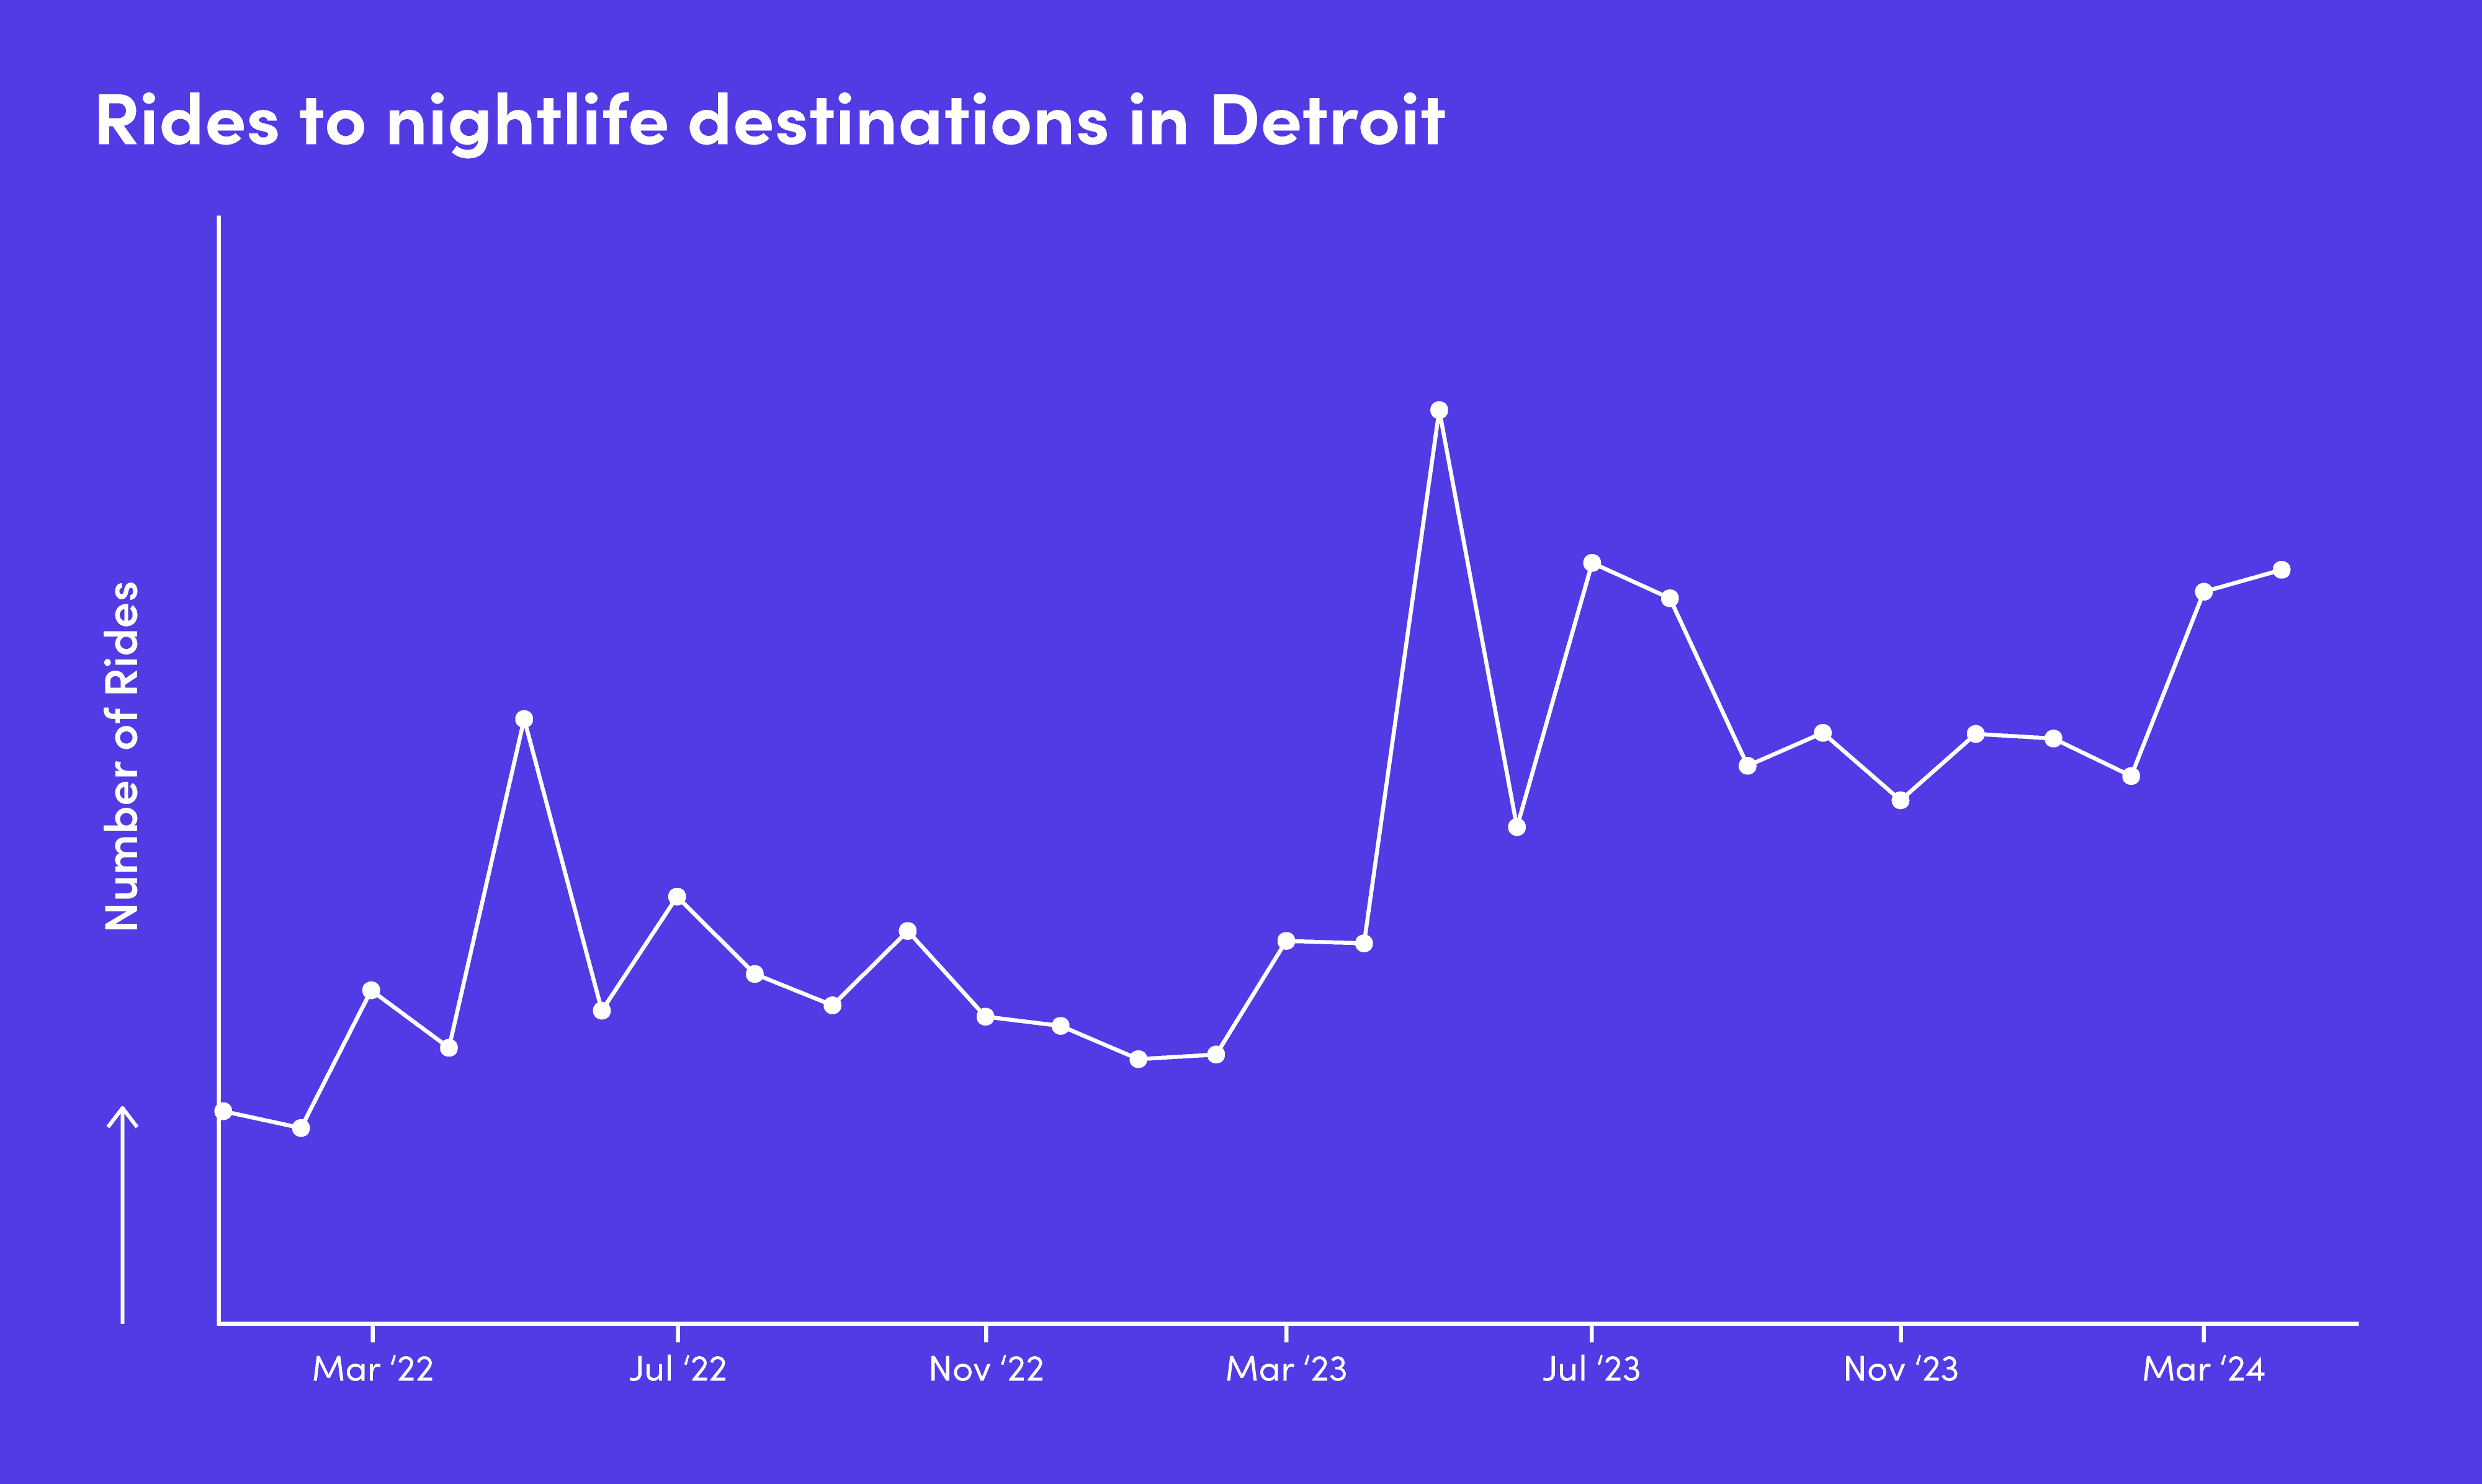 Chart showing rides to nightlife destinations in Detroit.